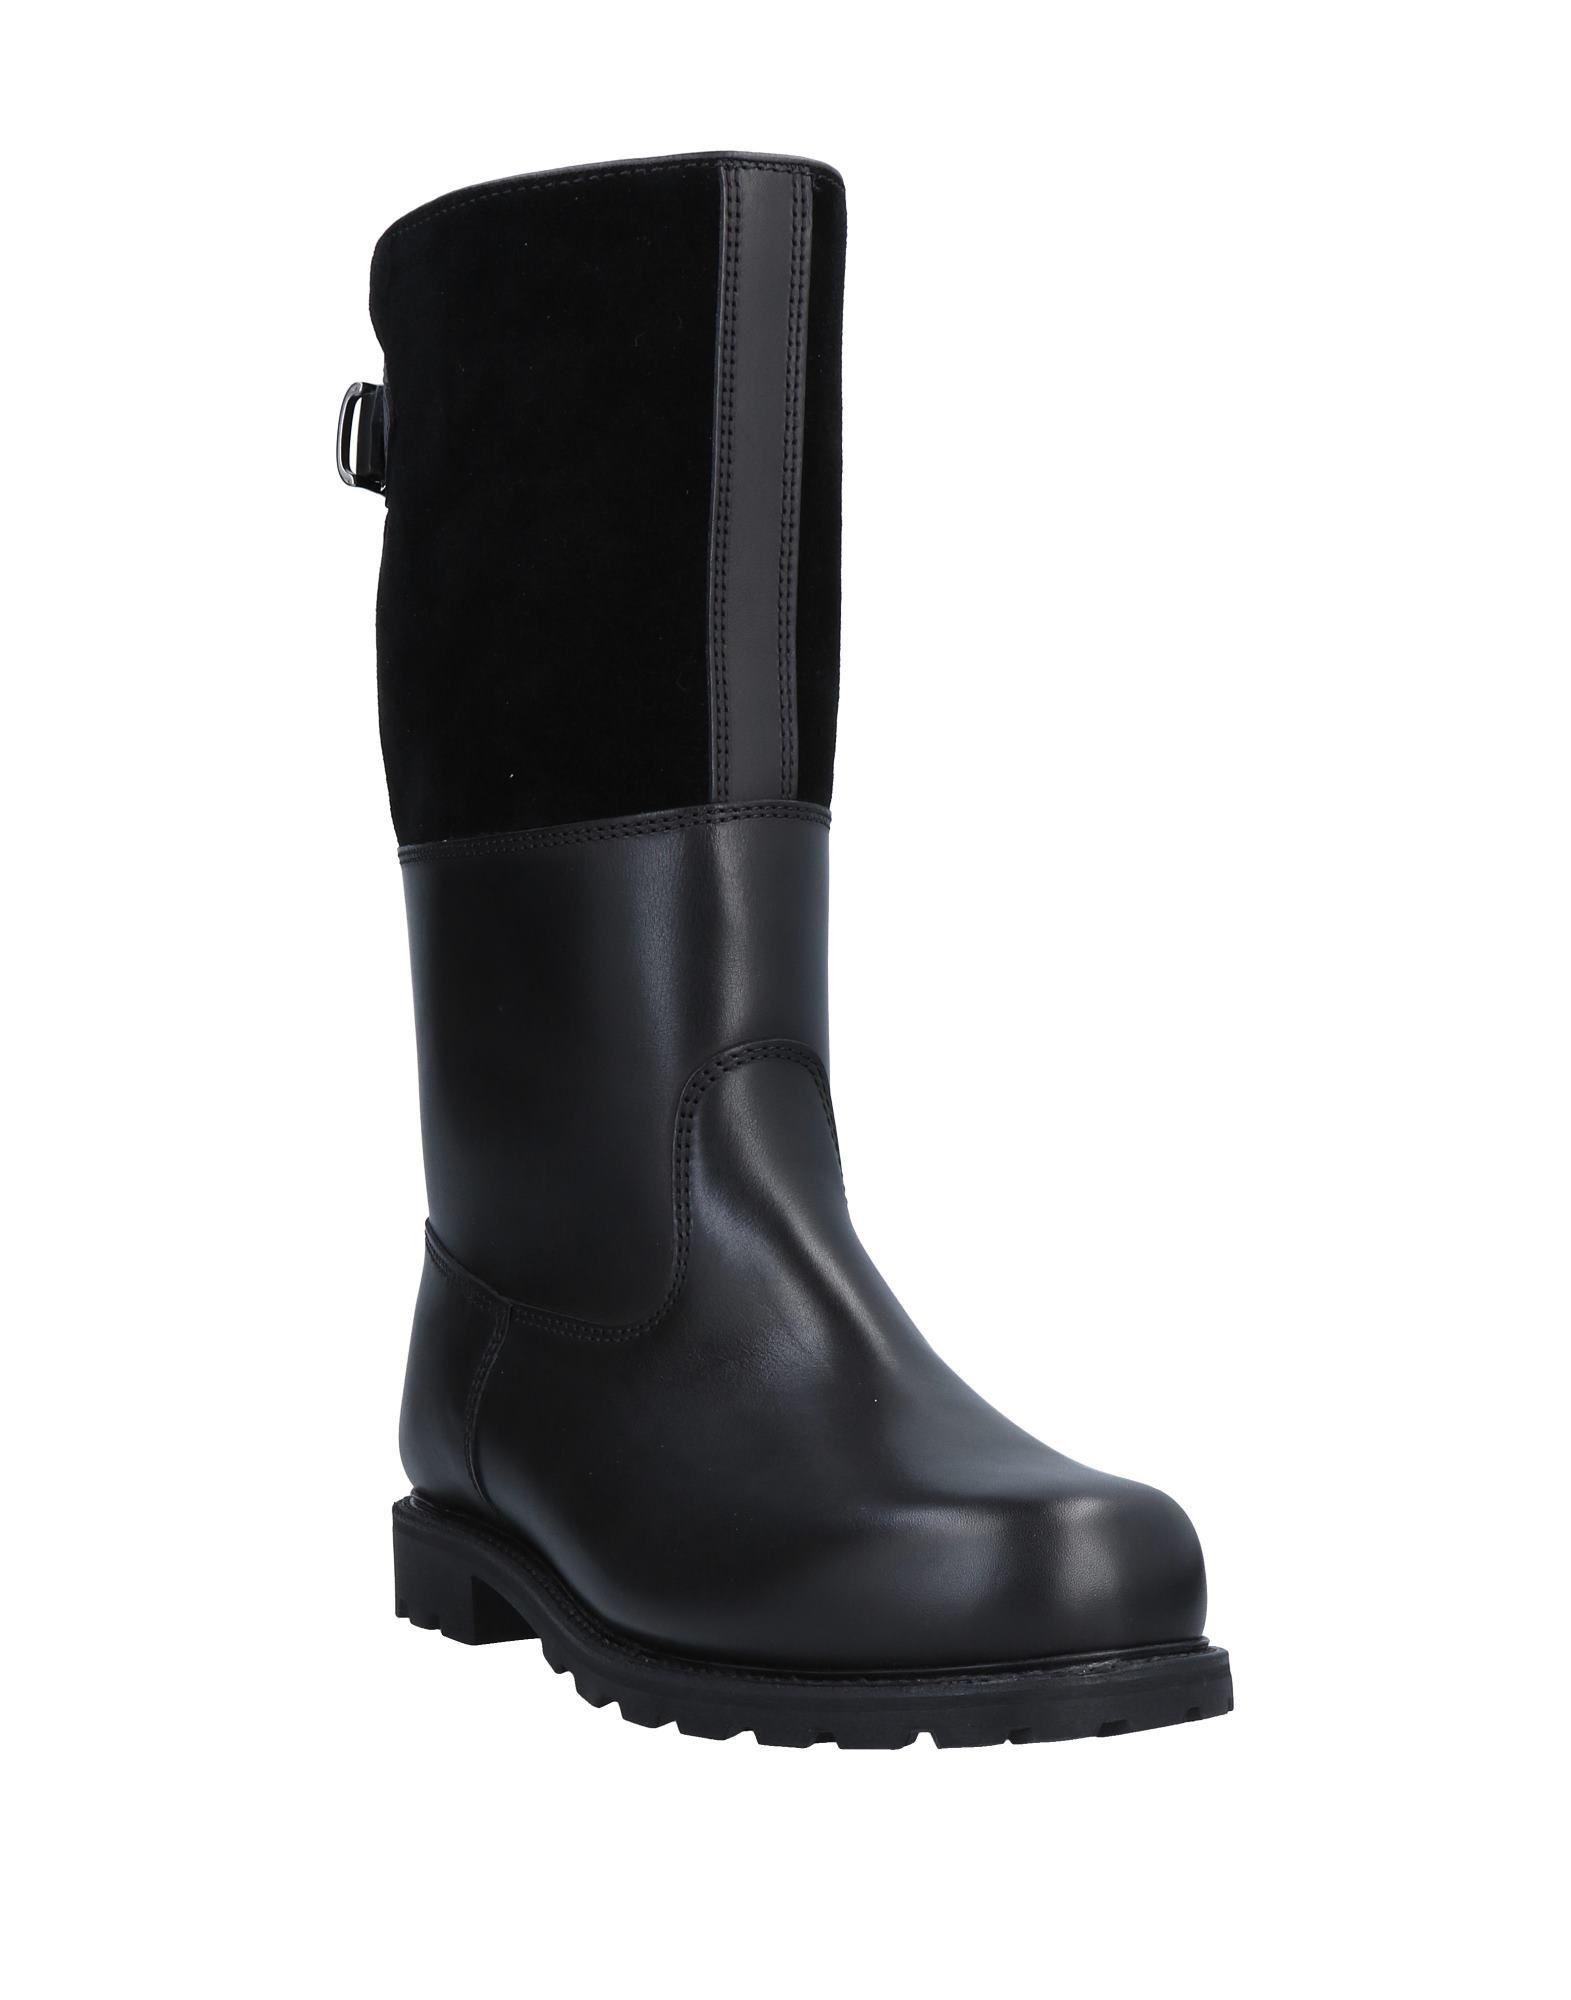 Ludwig Reiter Leather Boots in Black for Men - Lyst